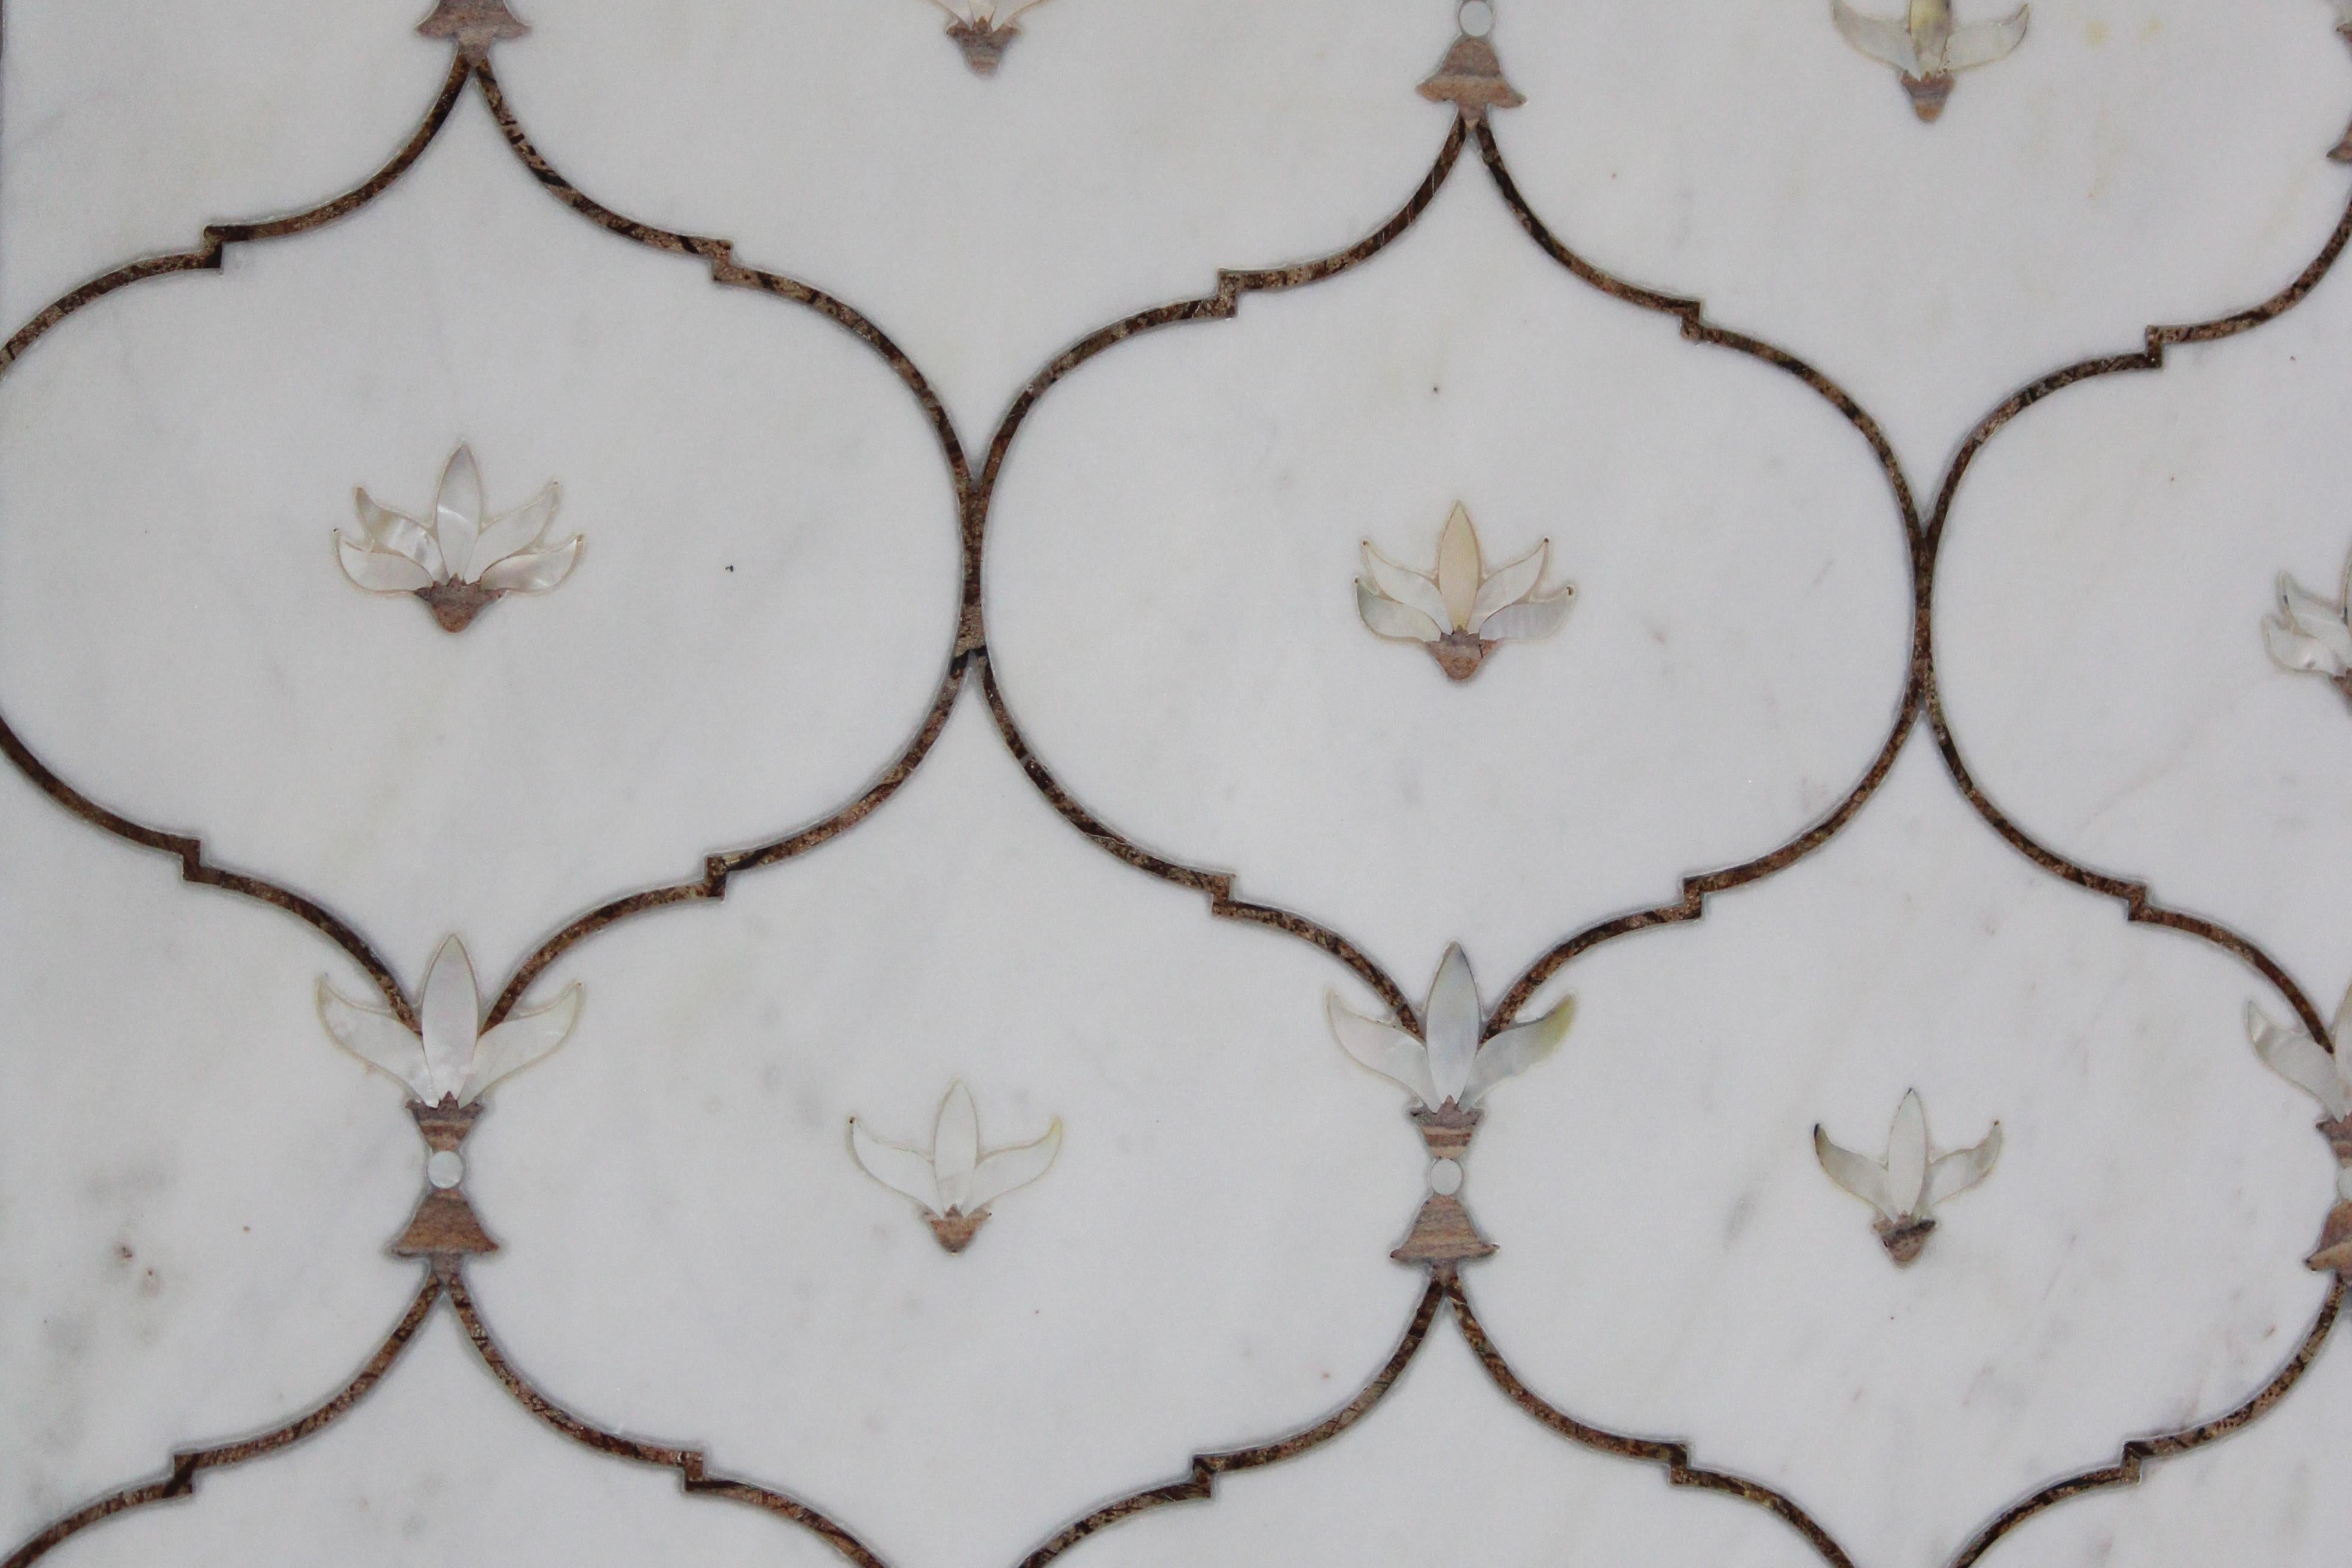 This stunning dining table top exhibits one of the most striking motifs of the mughal architecture in India. The lotus motif is inlaid using mother of pearl on the whitest of the marble using the centuries old technique of pietra dura / pacchikari.